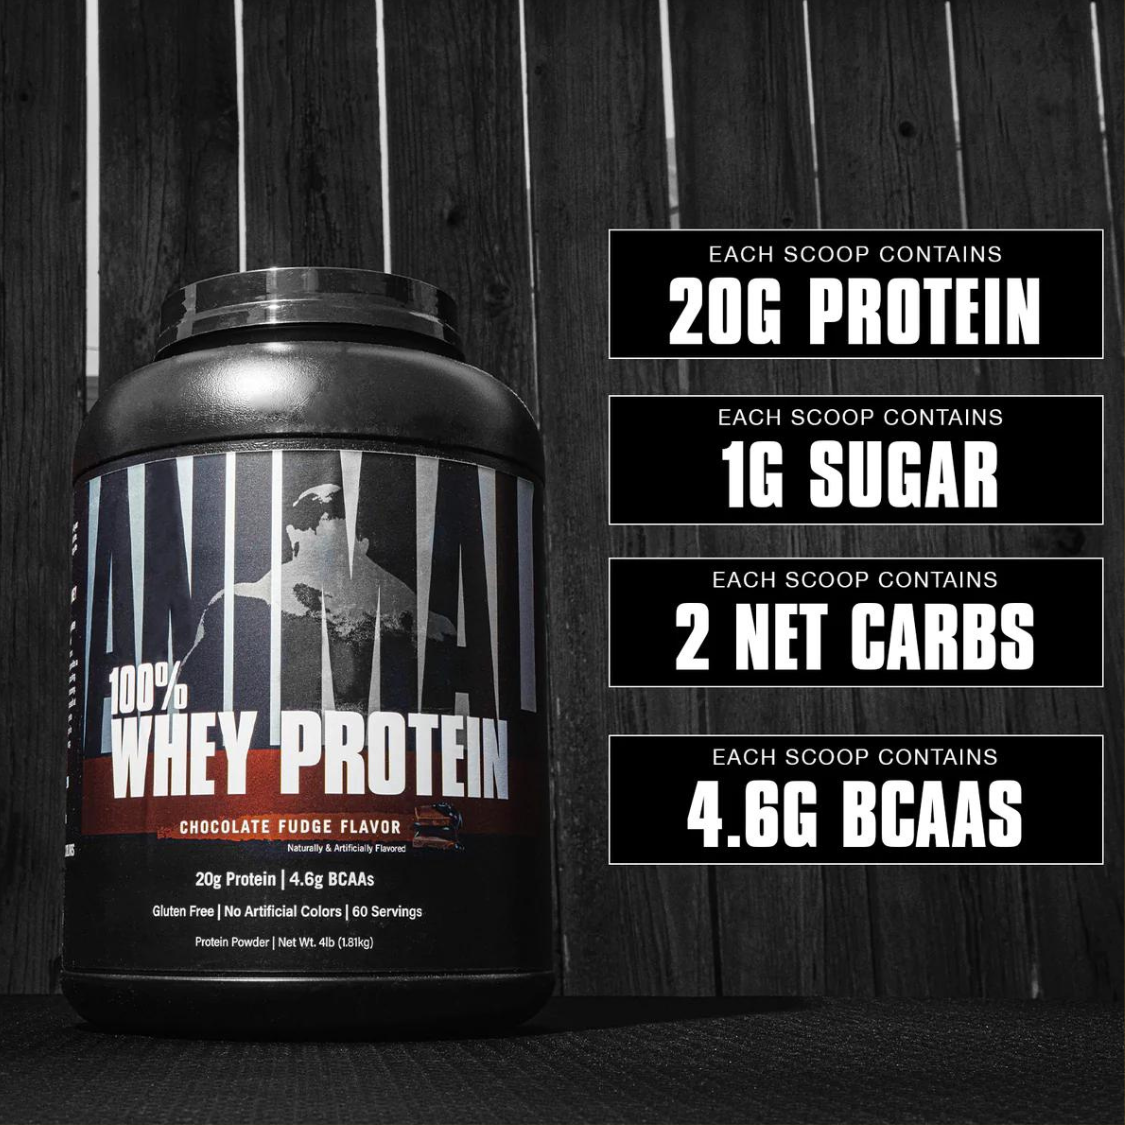 ANIMAL 100% WHEY PROTEIN 4 LBS UNIVERSAL NUTRITION